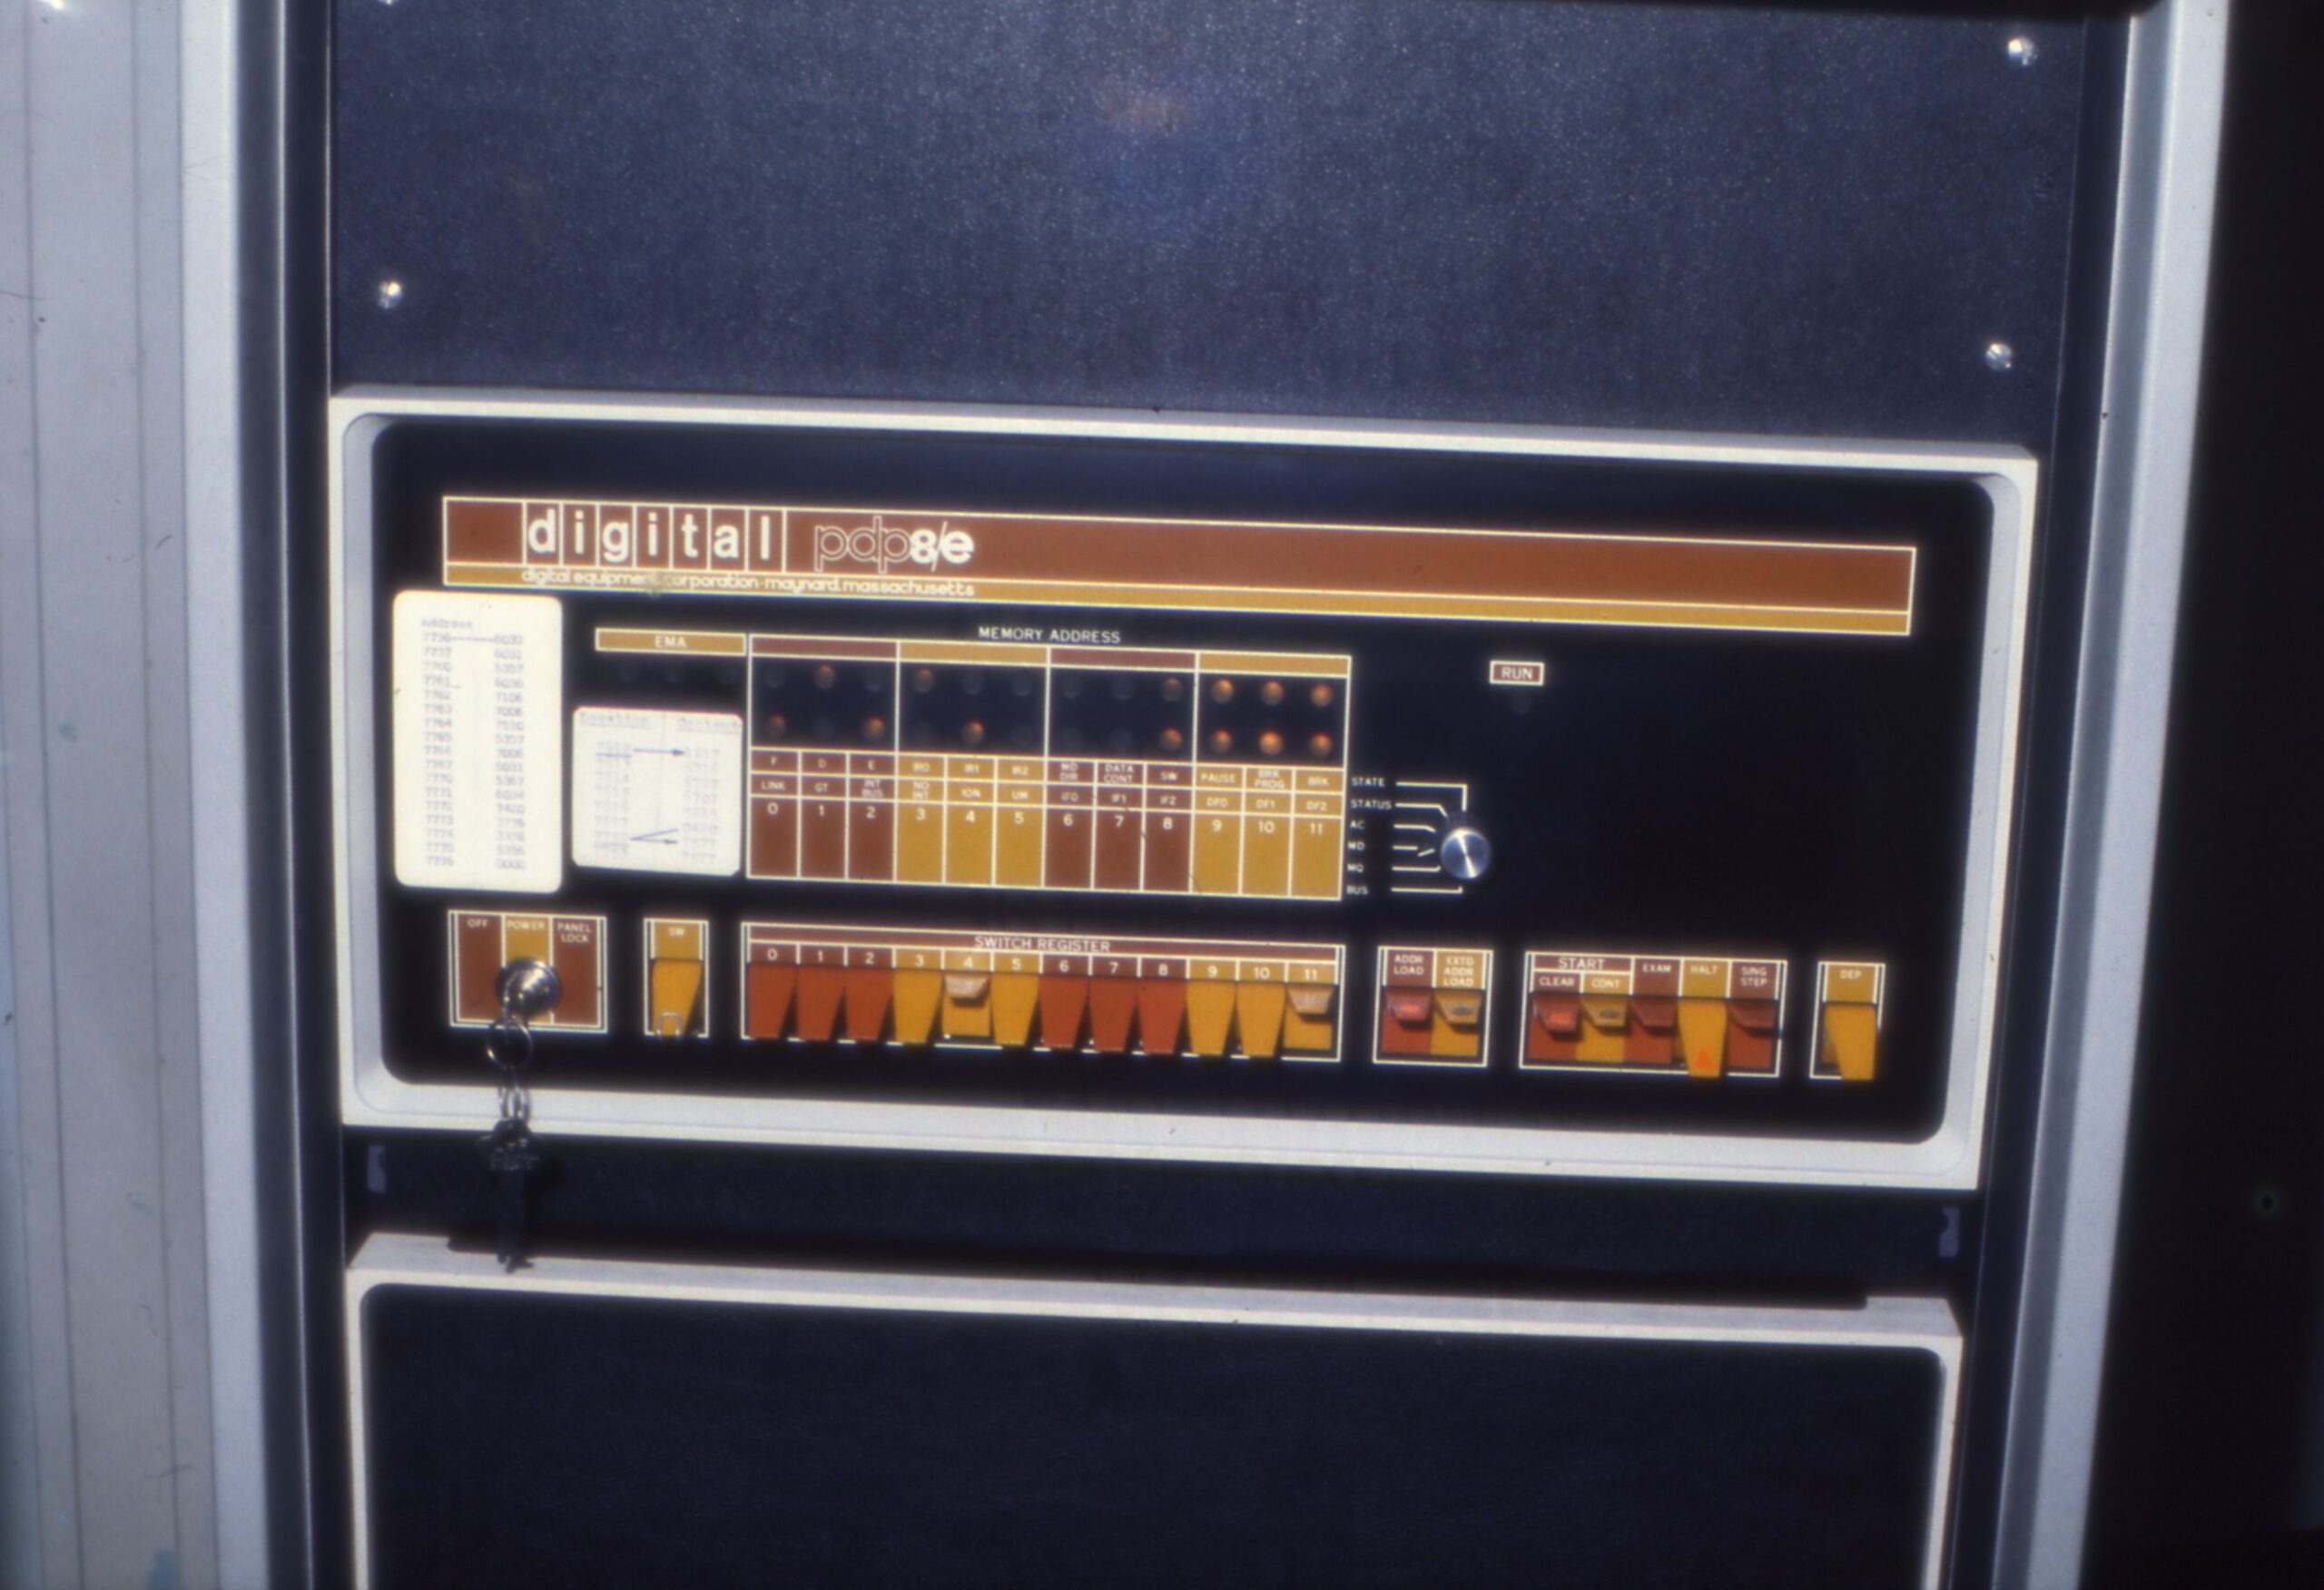 Close-up of the Digital pdp8e CPU and front panel in Repro